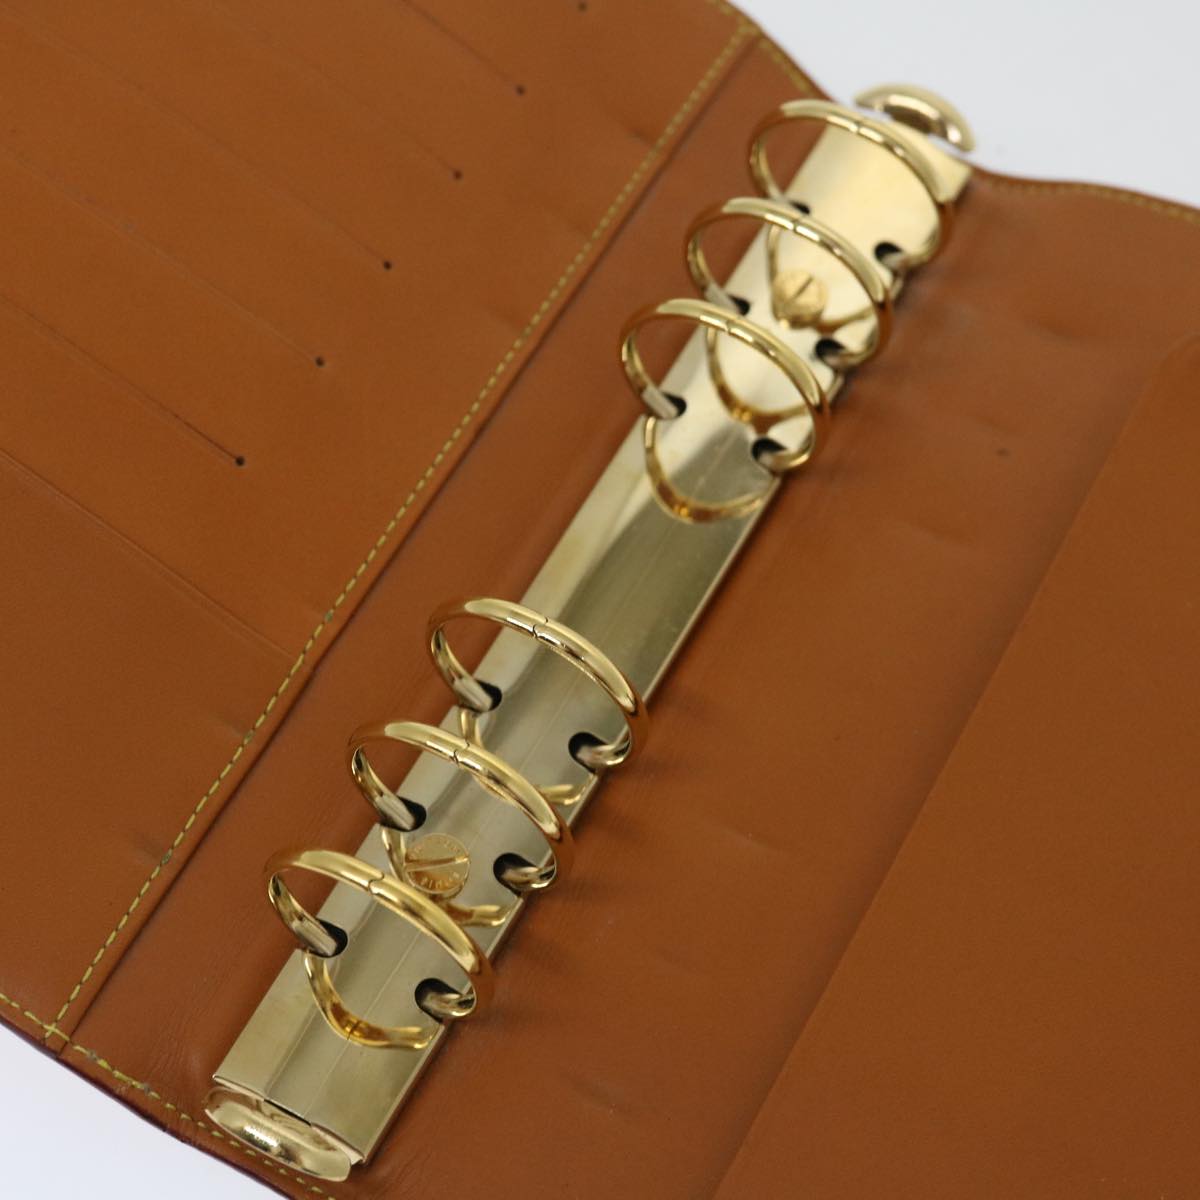 LOUIS VUITTON Nomad Leather Agenda MM Day Planner Cover Beige R20473 Auth 68970